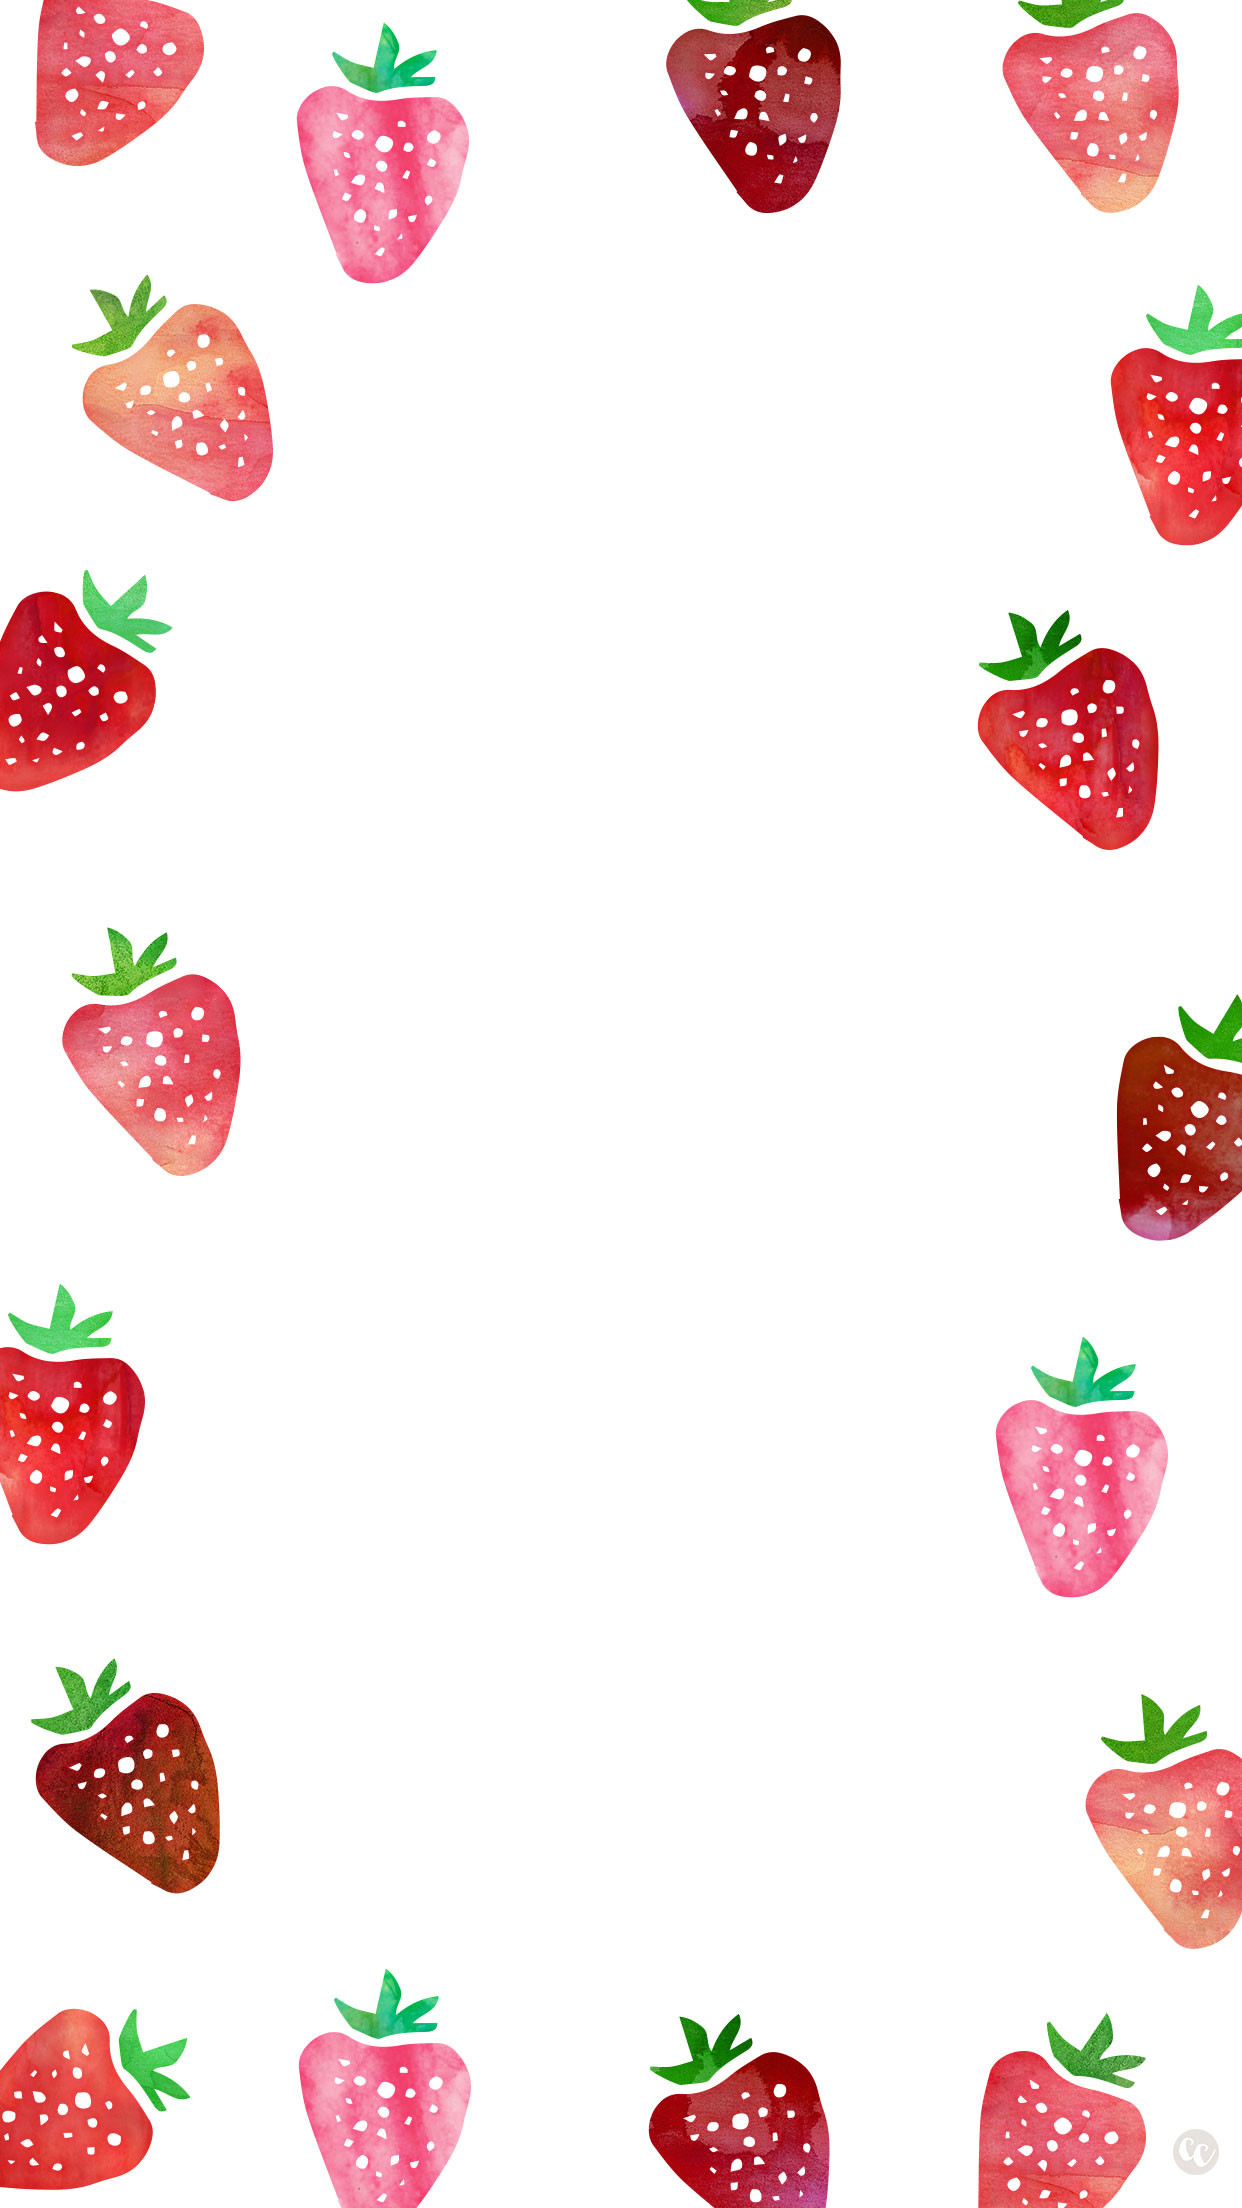 Dress up your smartphone with this cute strawberry wallpaper Also available for desktop and iPad